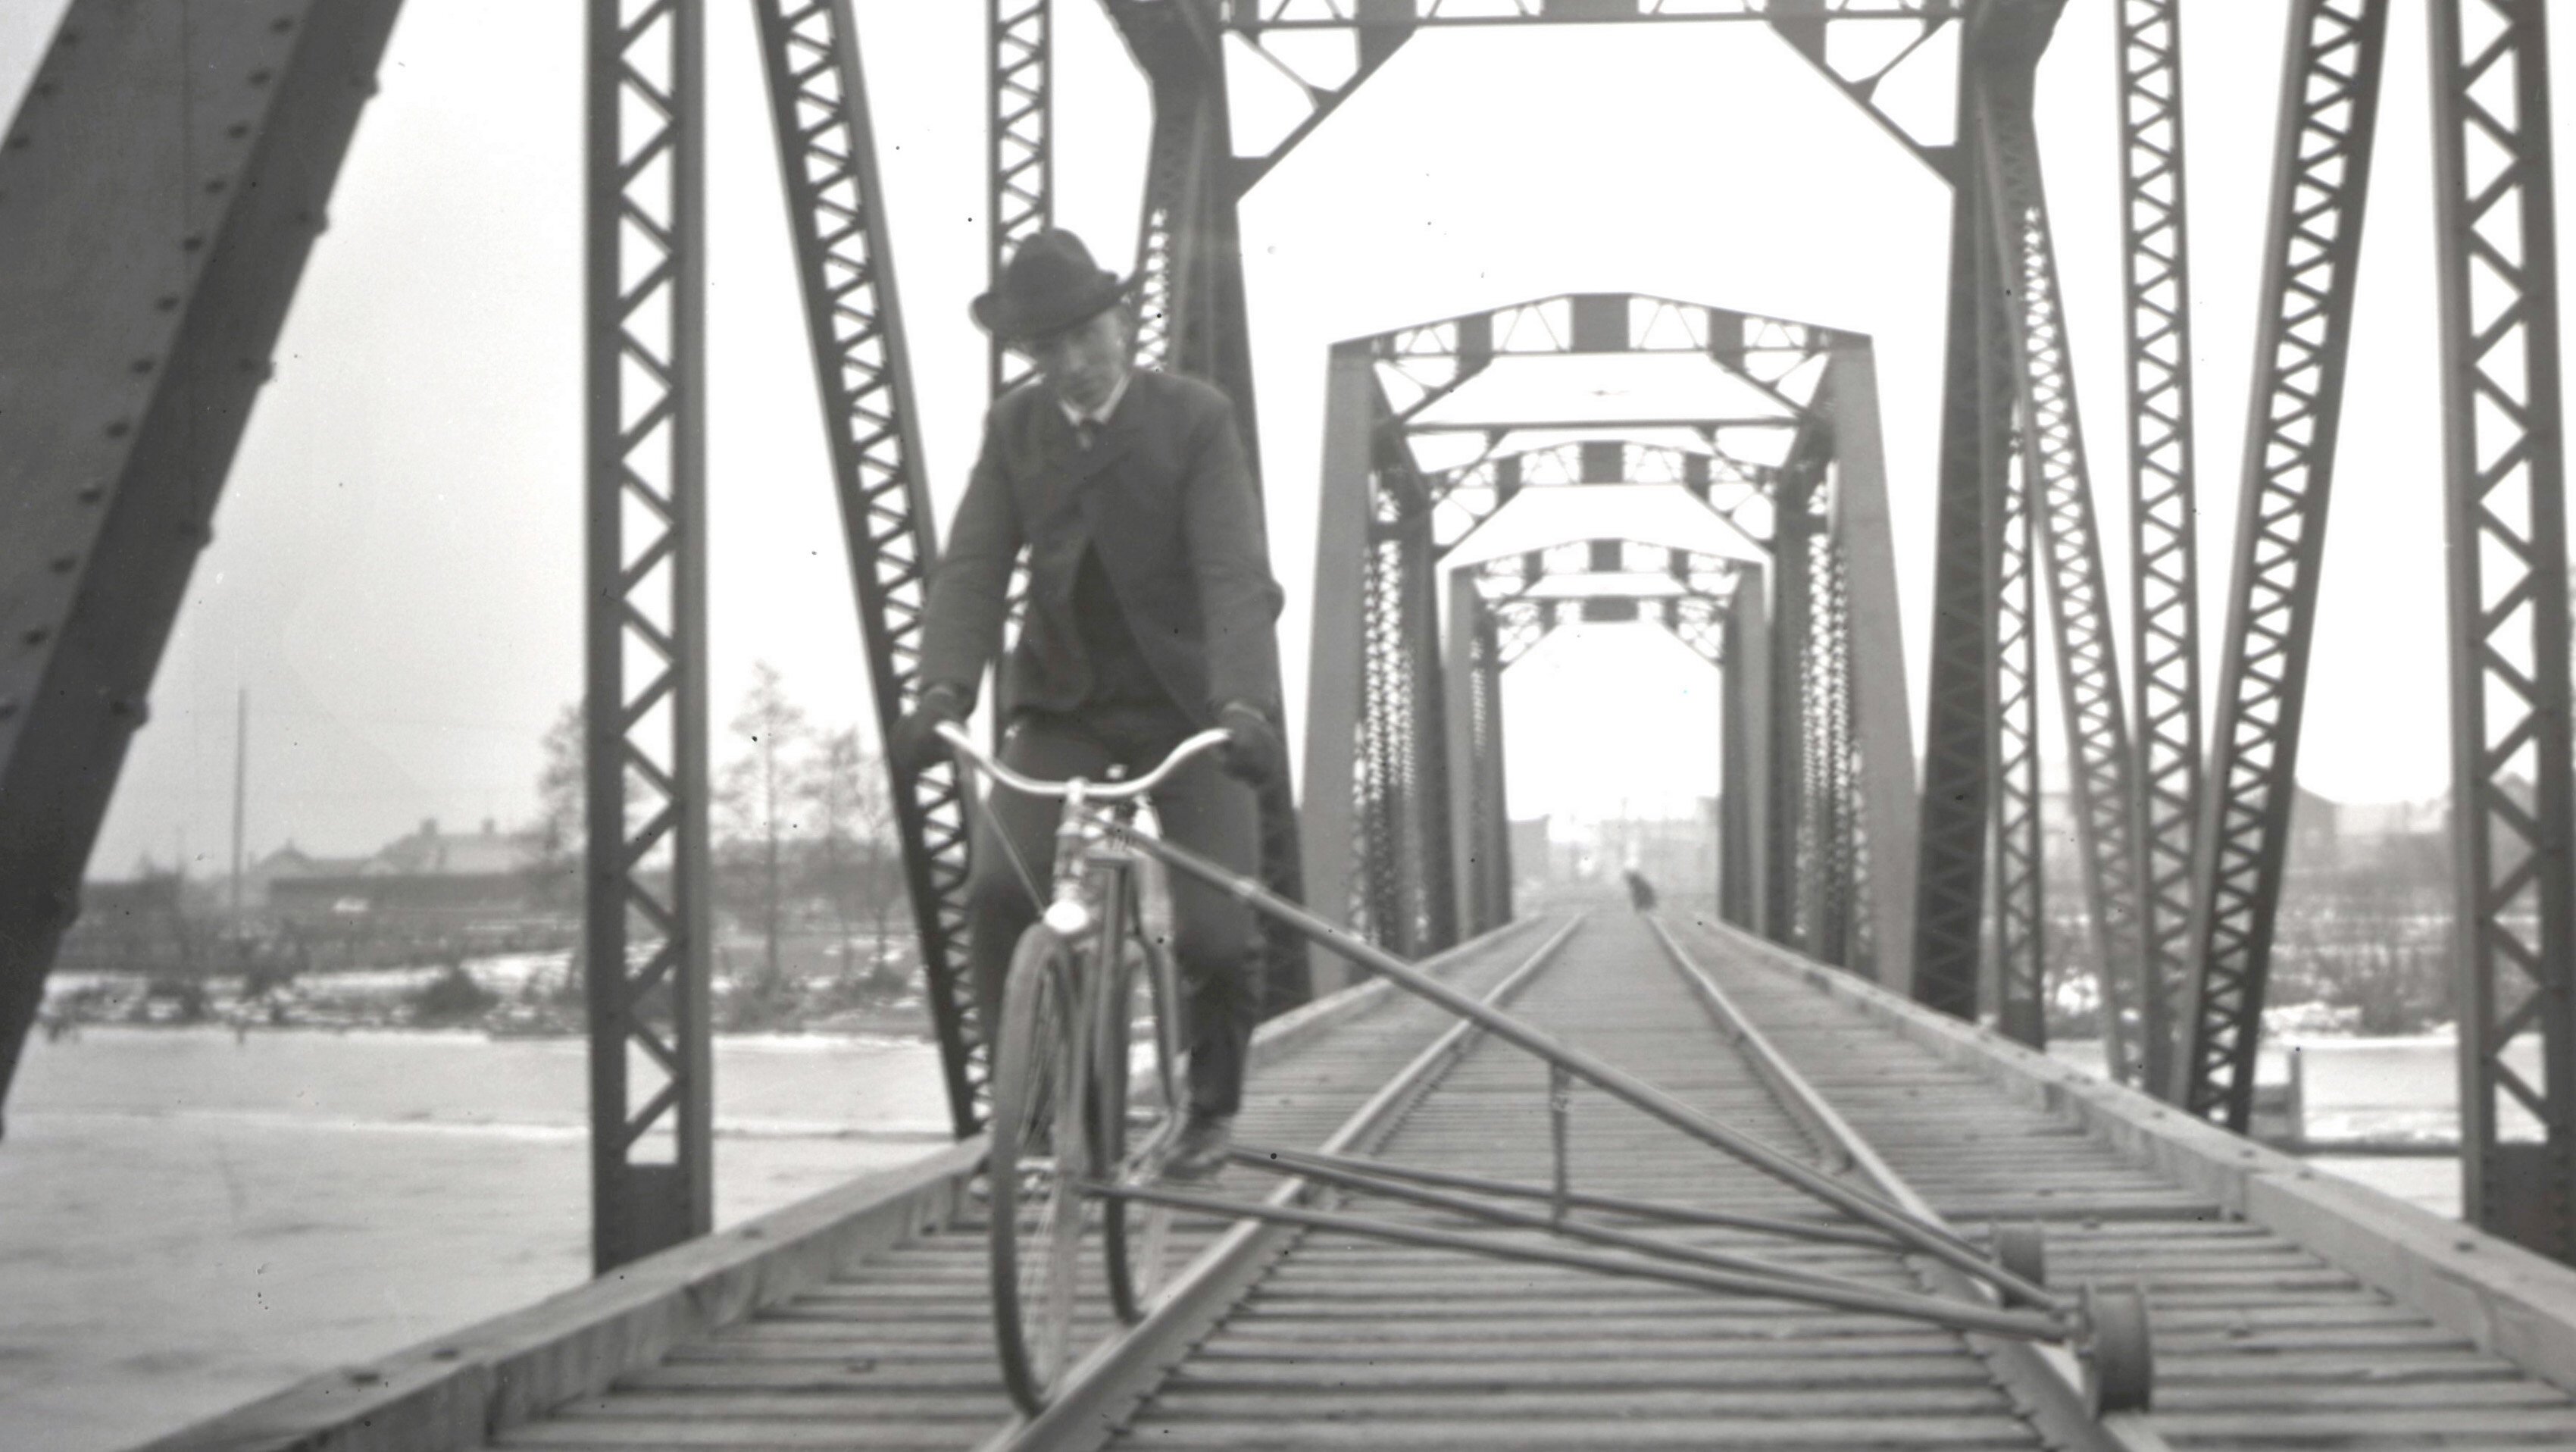 An unidentified man rides a railroad bicycle in Manistique.